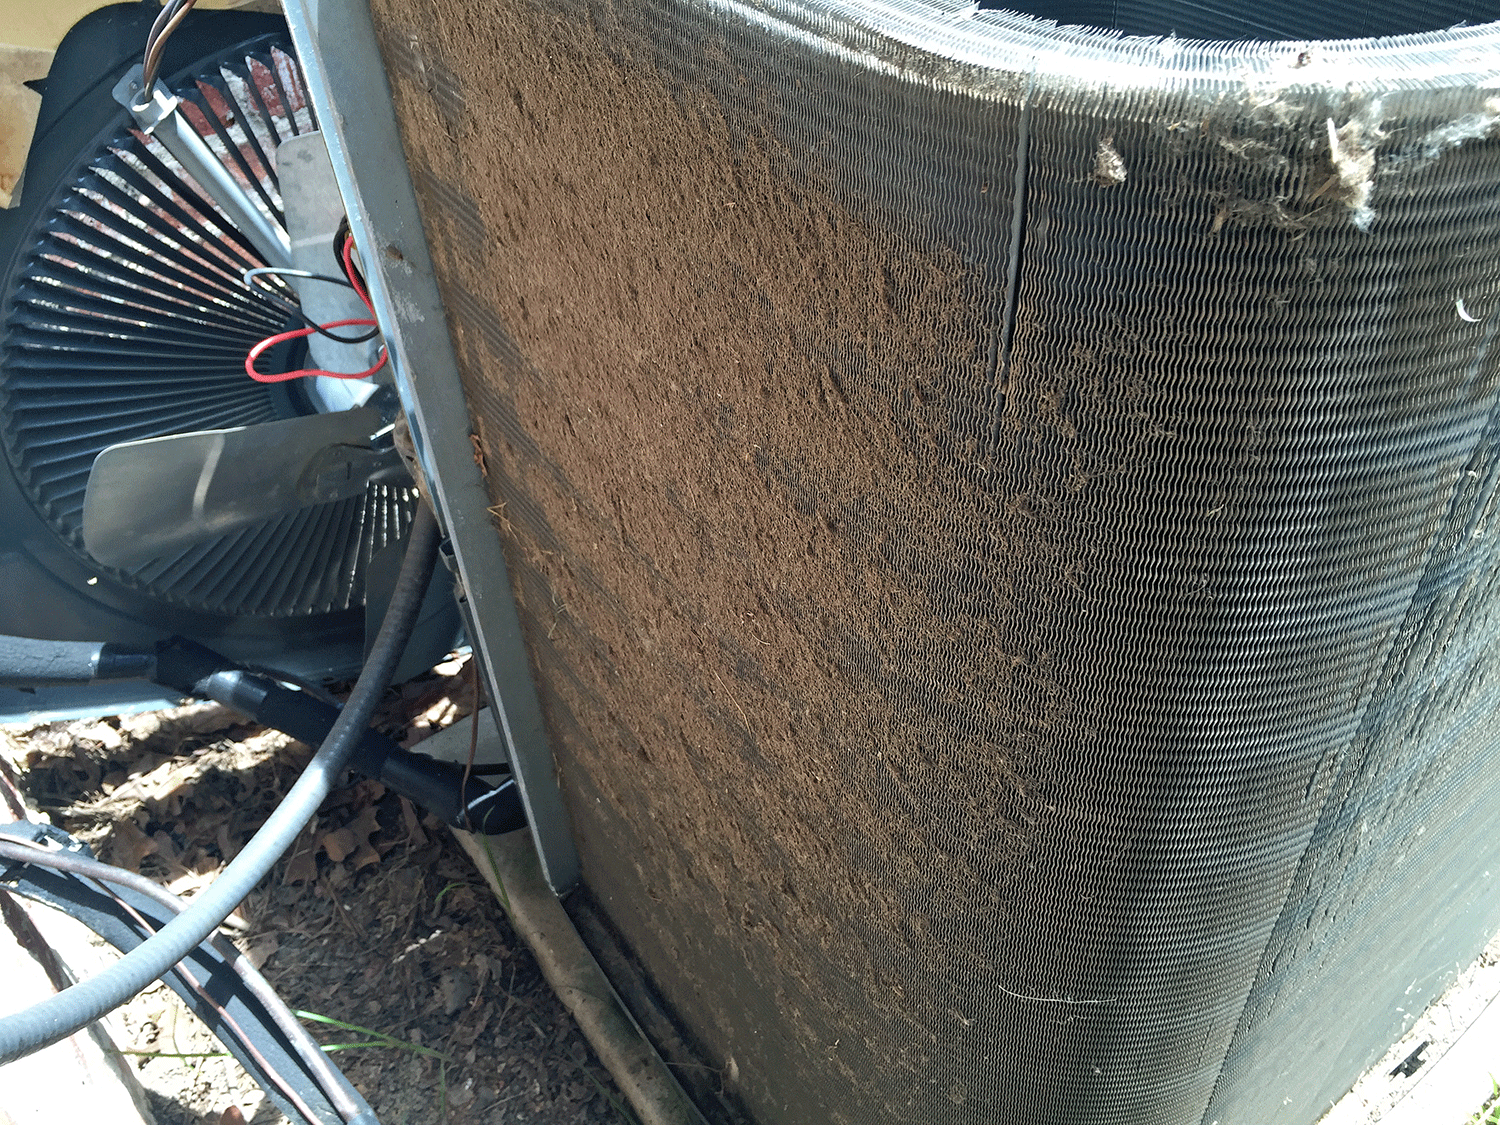 Air conditioner dirty condenser coil that needs cleaning